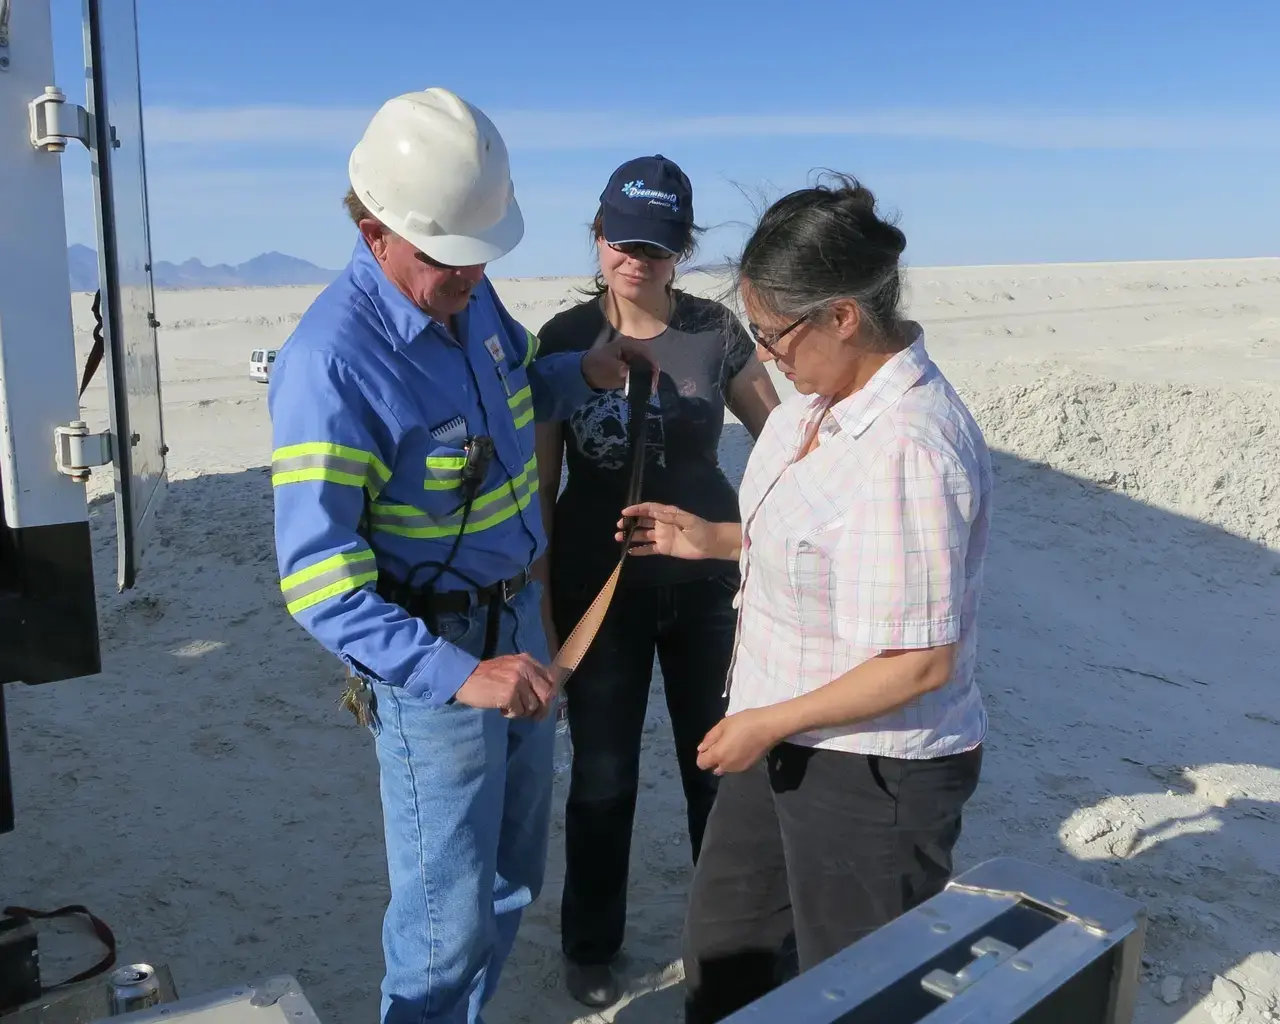 Tacita Dean on location for JG at Intrepid Potash, Wendover, Utah, with Ponds Supervisor, Russ Draper, and his daughter, Jessica (May 2012). Photograph: Richard Torchia.